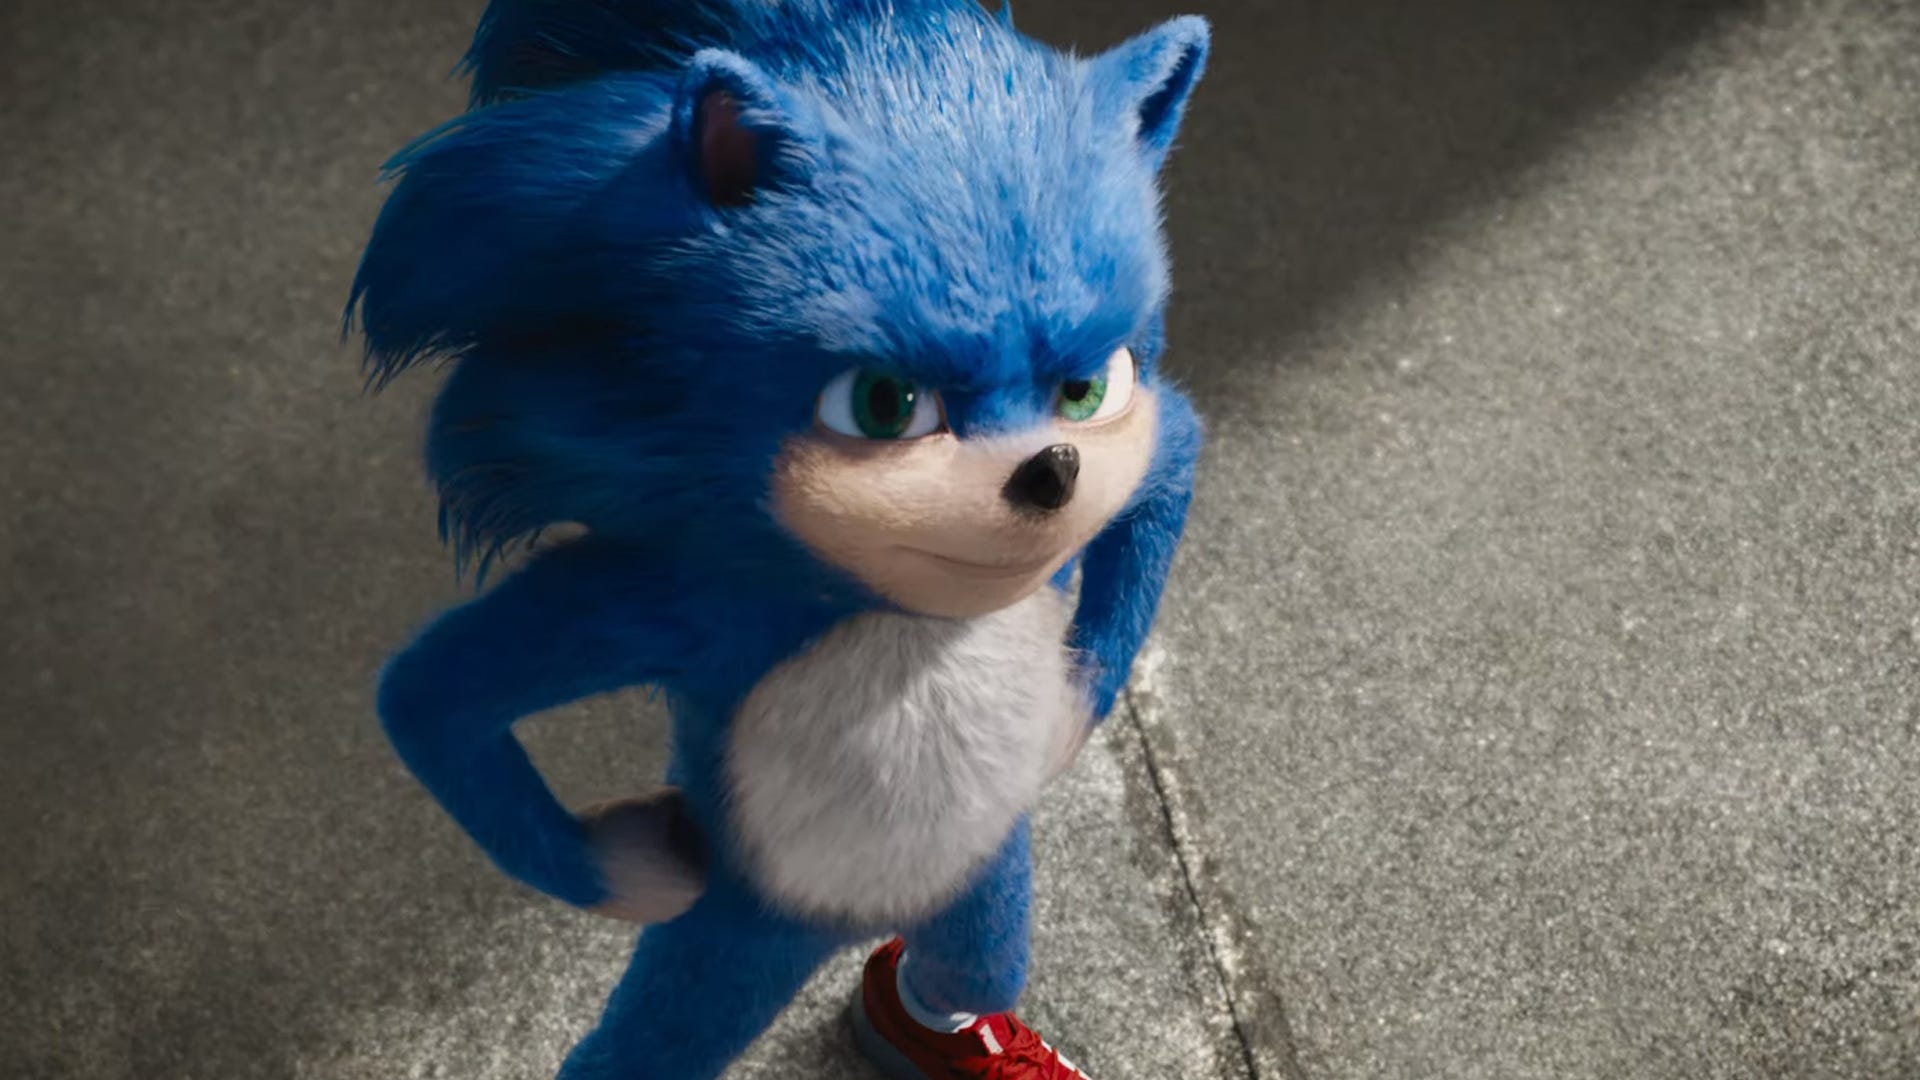 Exclusive: I found an unused Knuckles render in the official Sonic movie  sequel poster. Here's how it happened. - Tails' Channel